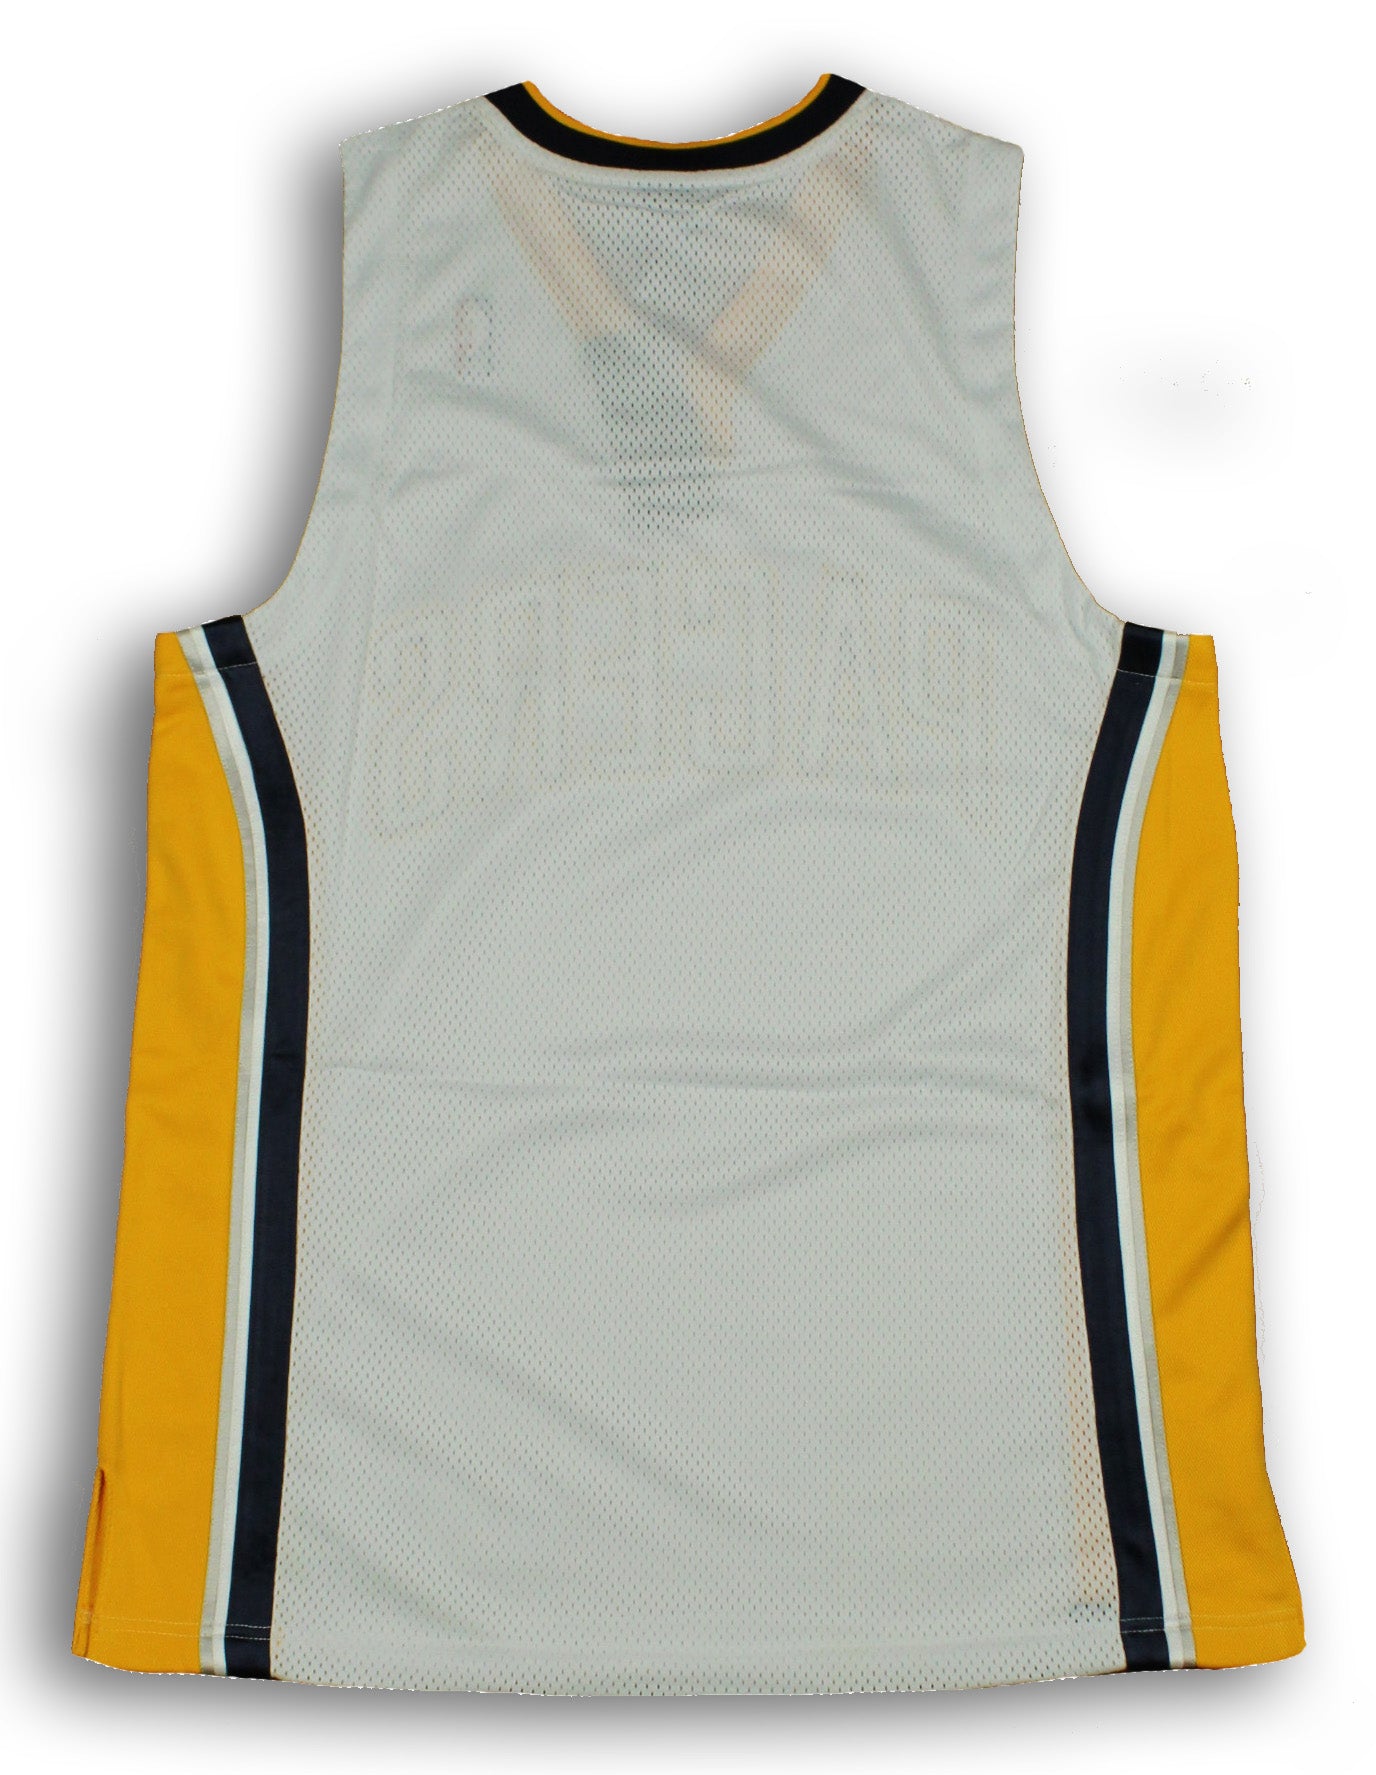 Blank Indiana Pacers Jerseys, Plain Pacers Basketball Jerseys